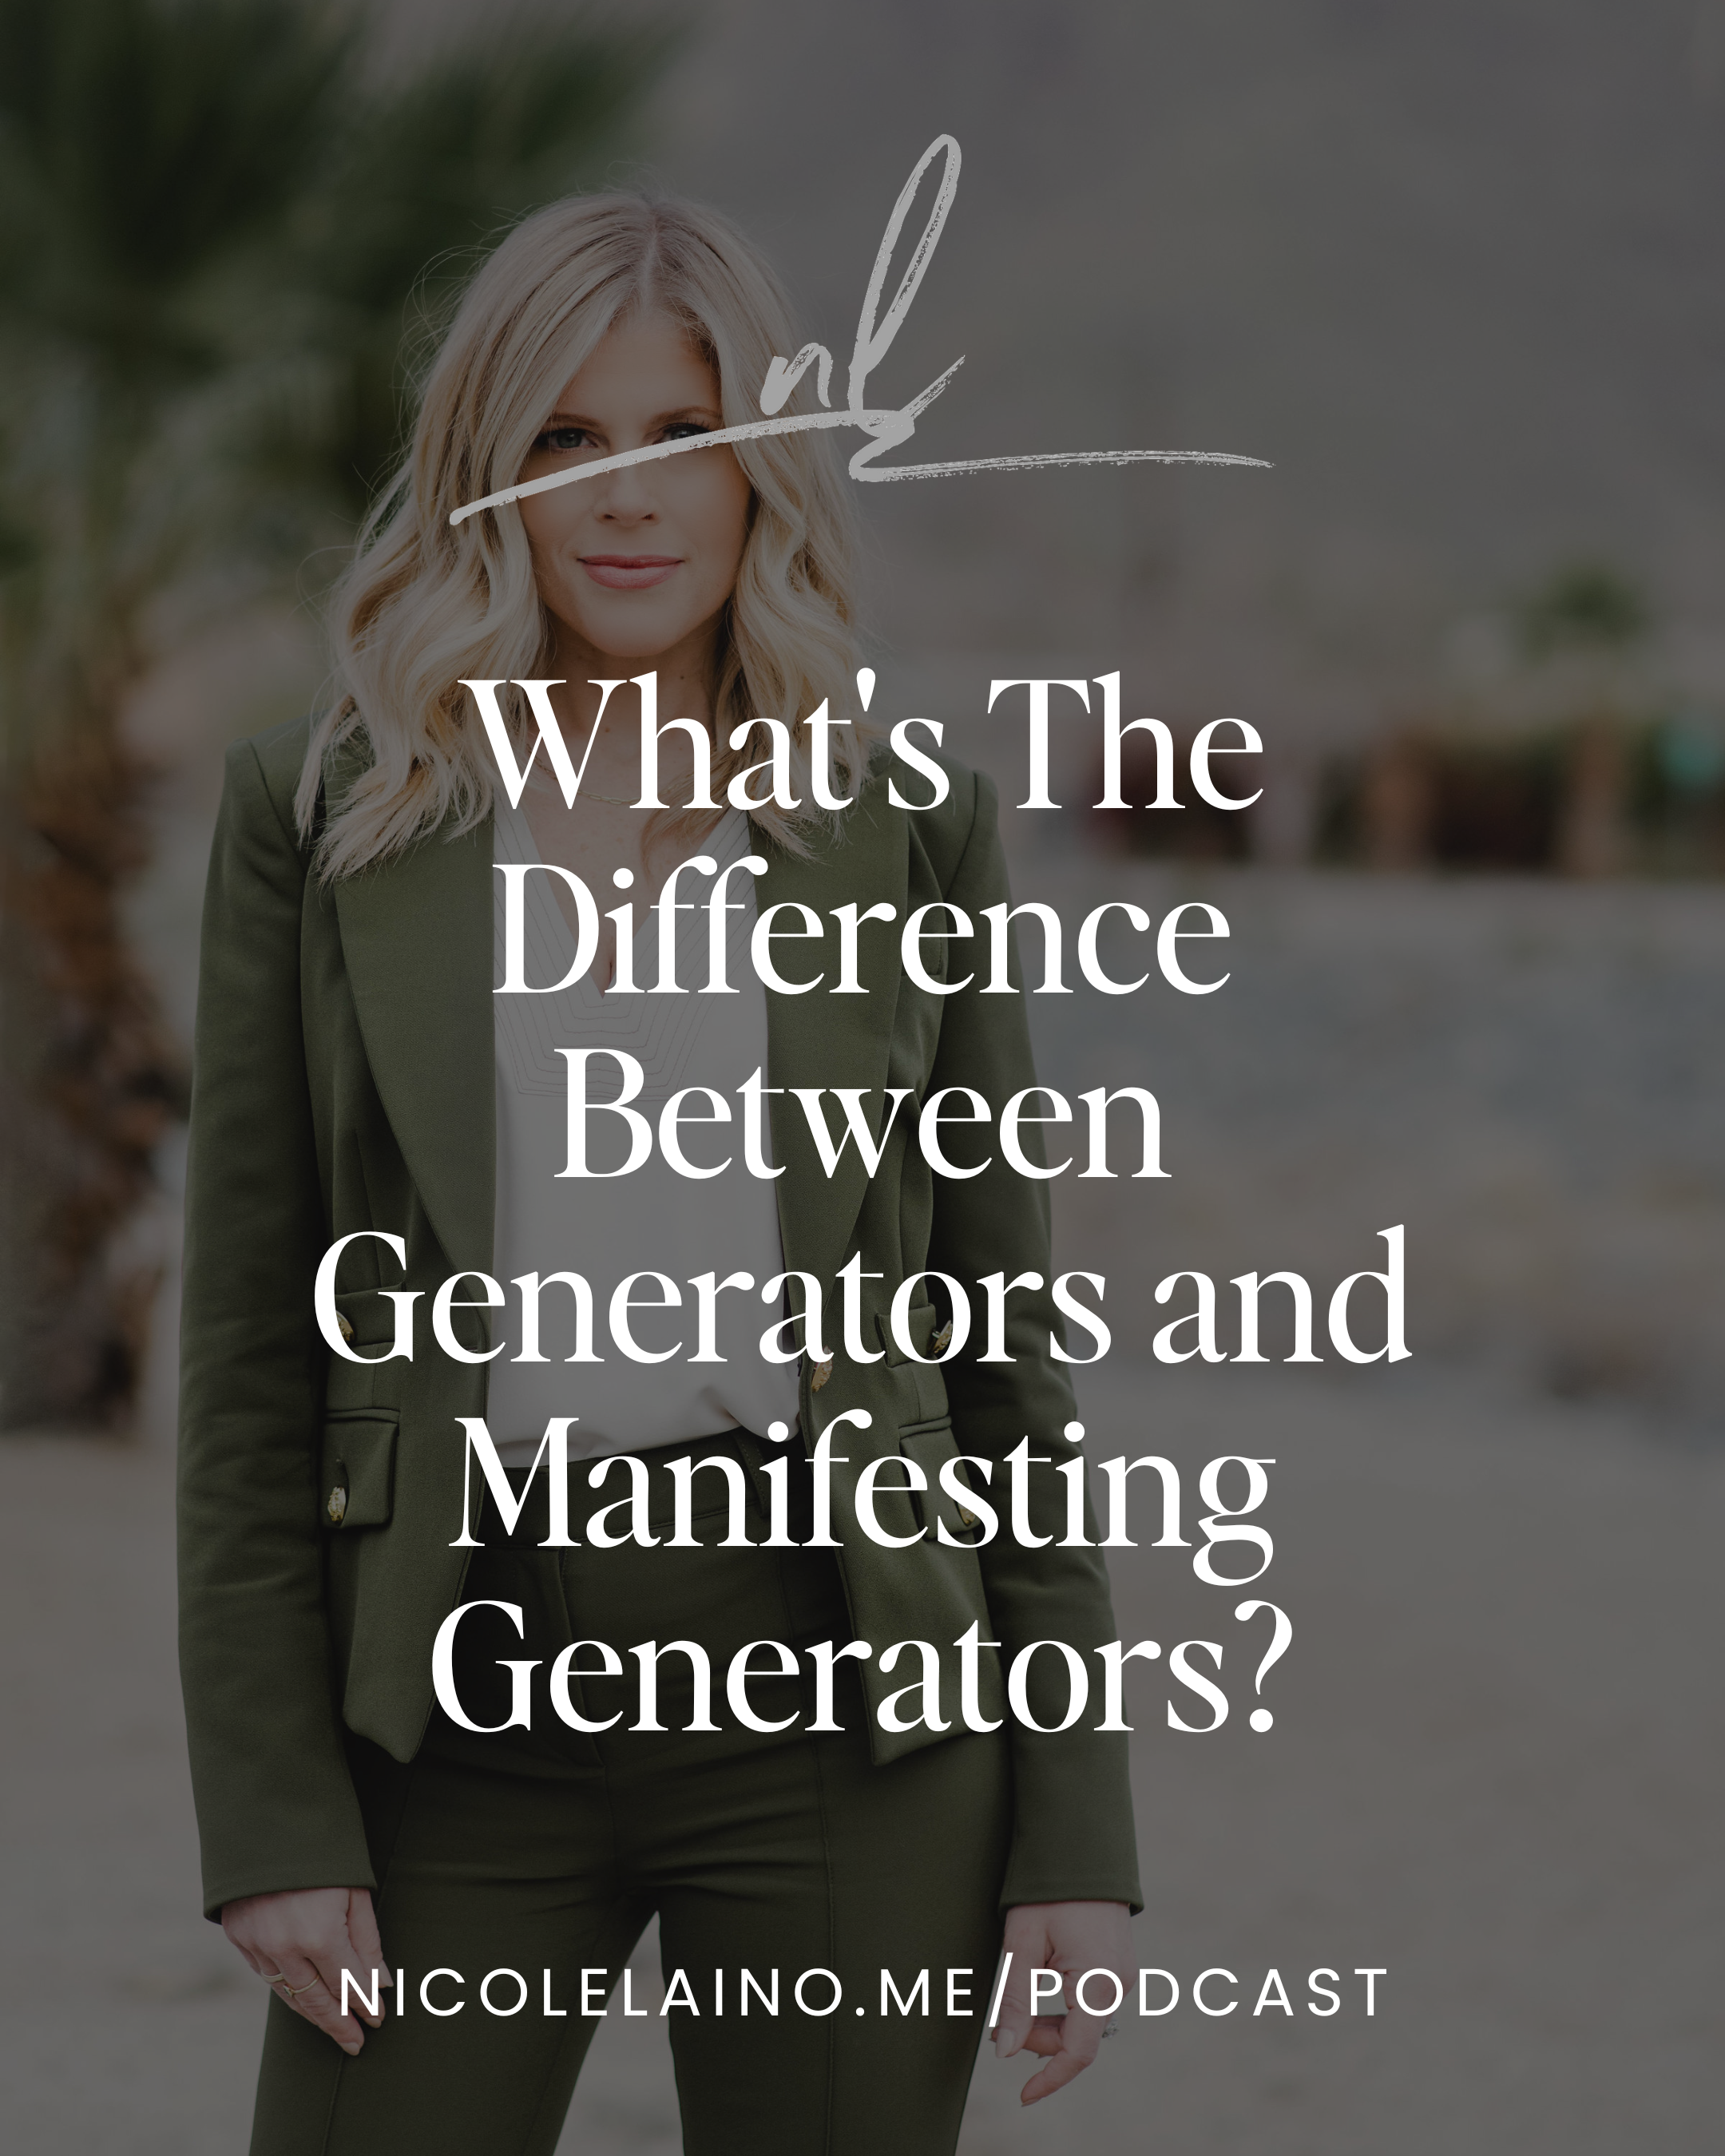 What's The Difference Between Generators and Manifesting Generators?